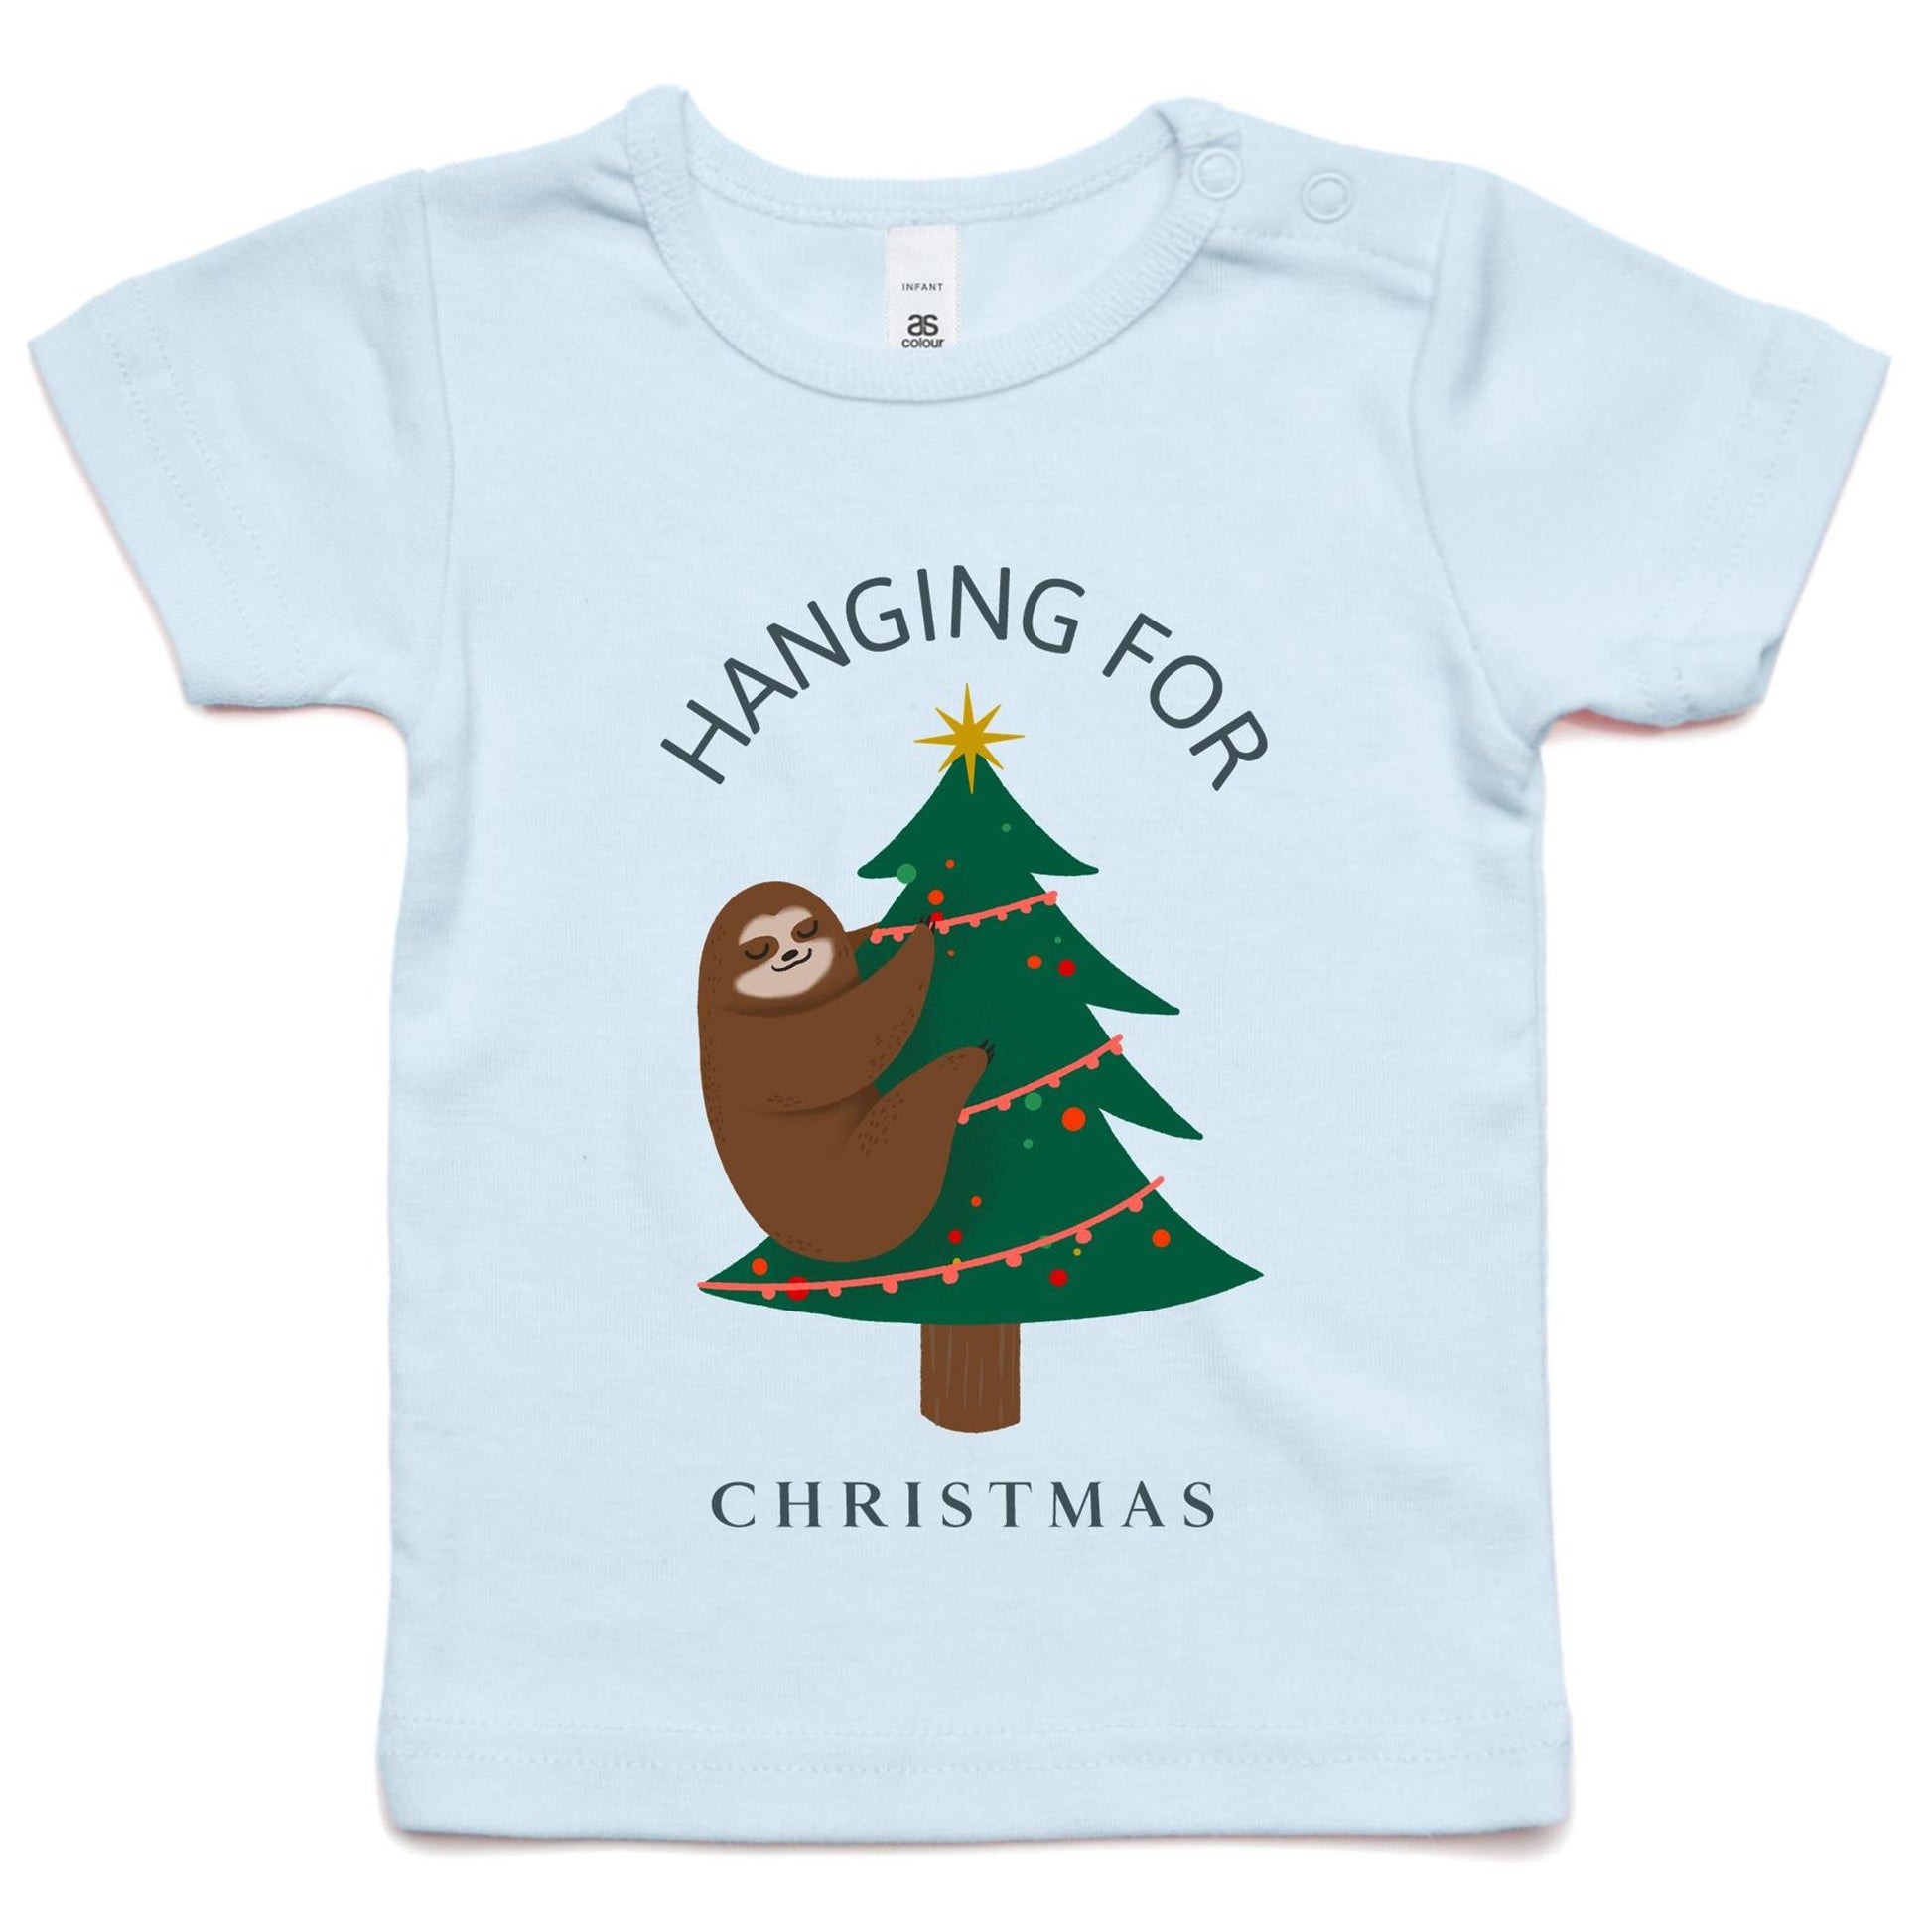 Hanging For Christmas - Baby T-shirt Powder Blue Christmas Baby T-shirt Merry Christmas